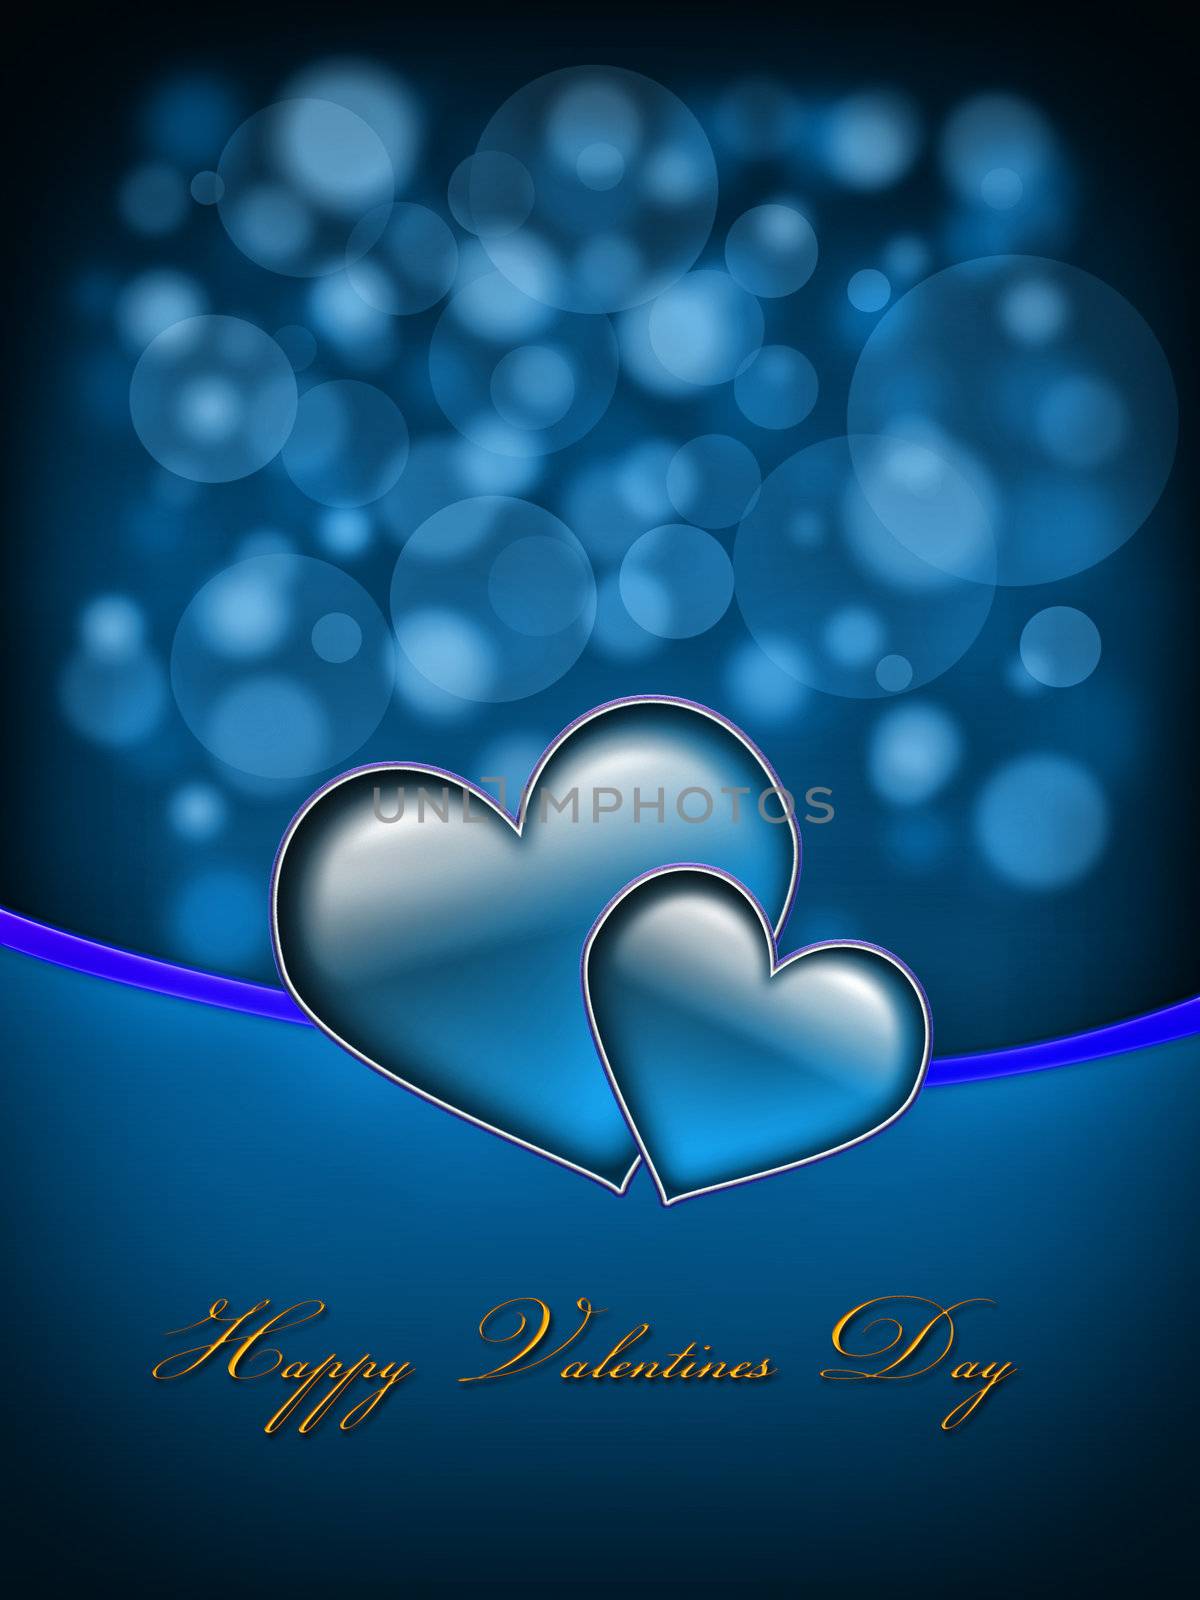 Valentines Day Card with golden Happy Valentines Day text and two big hearts - all in blue and purple